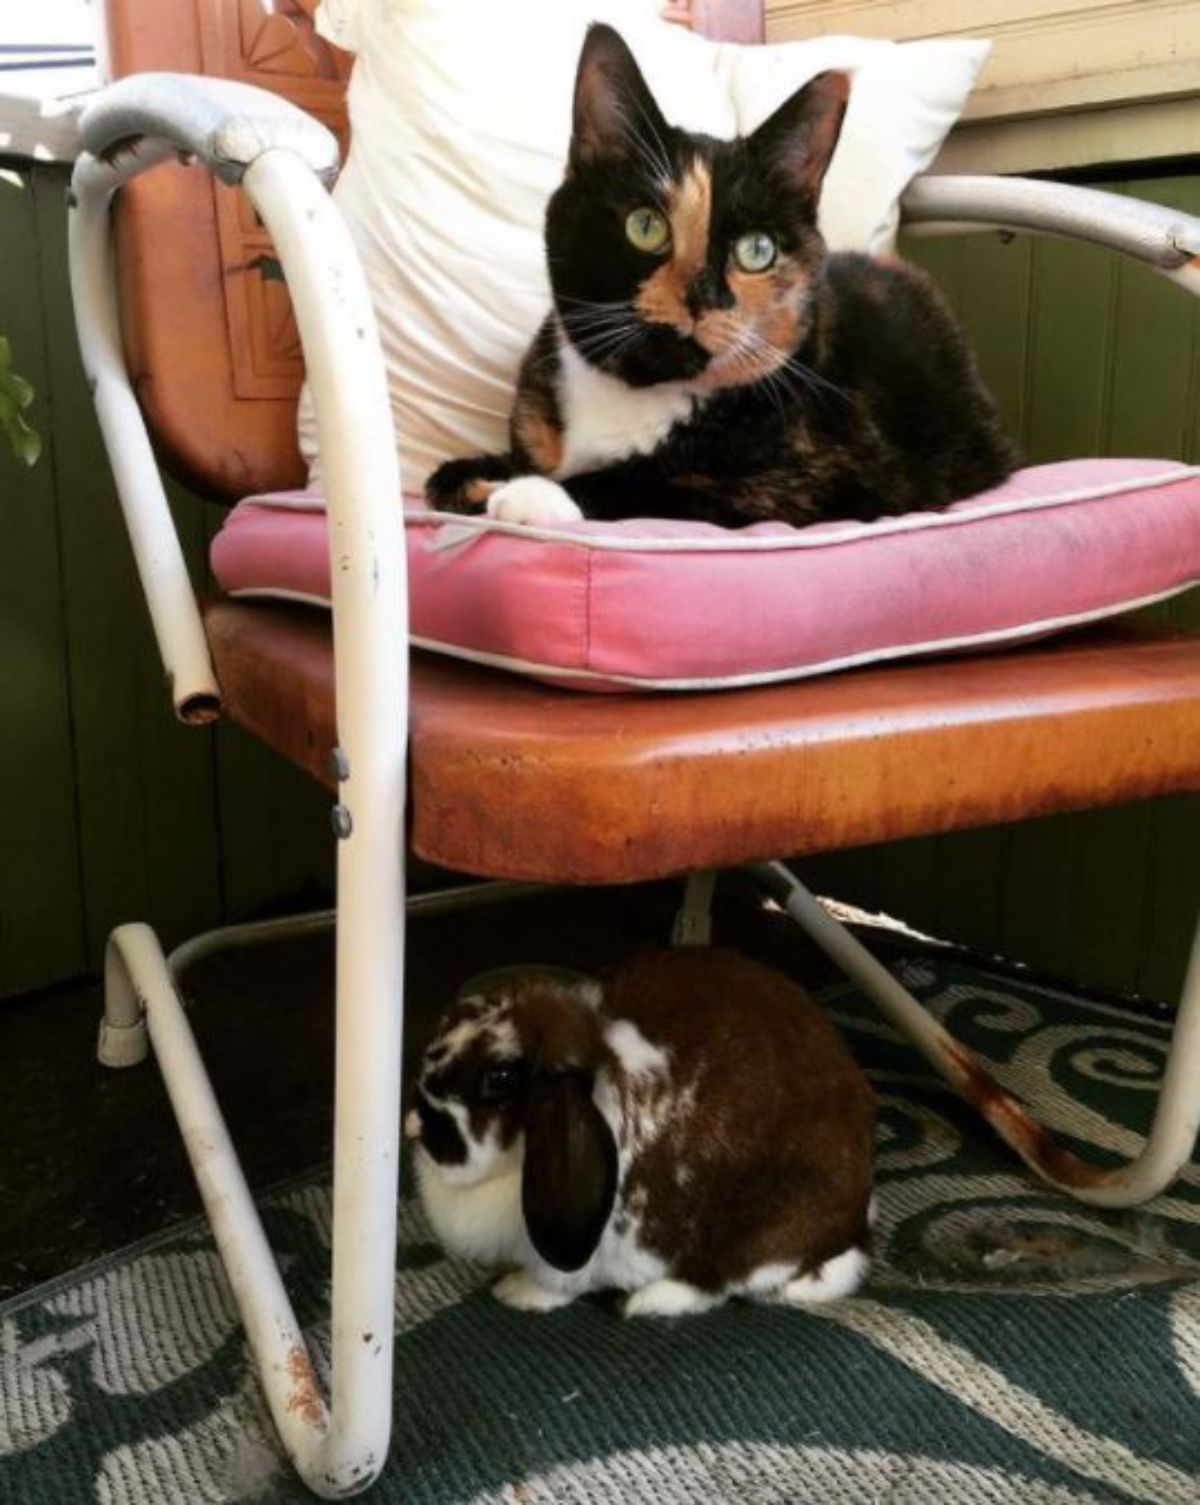 bown and white cat on a chair and brown and white rabbit under the chair